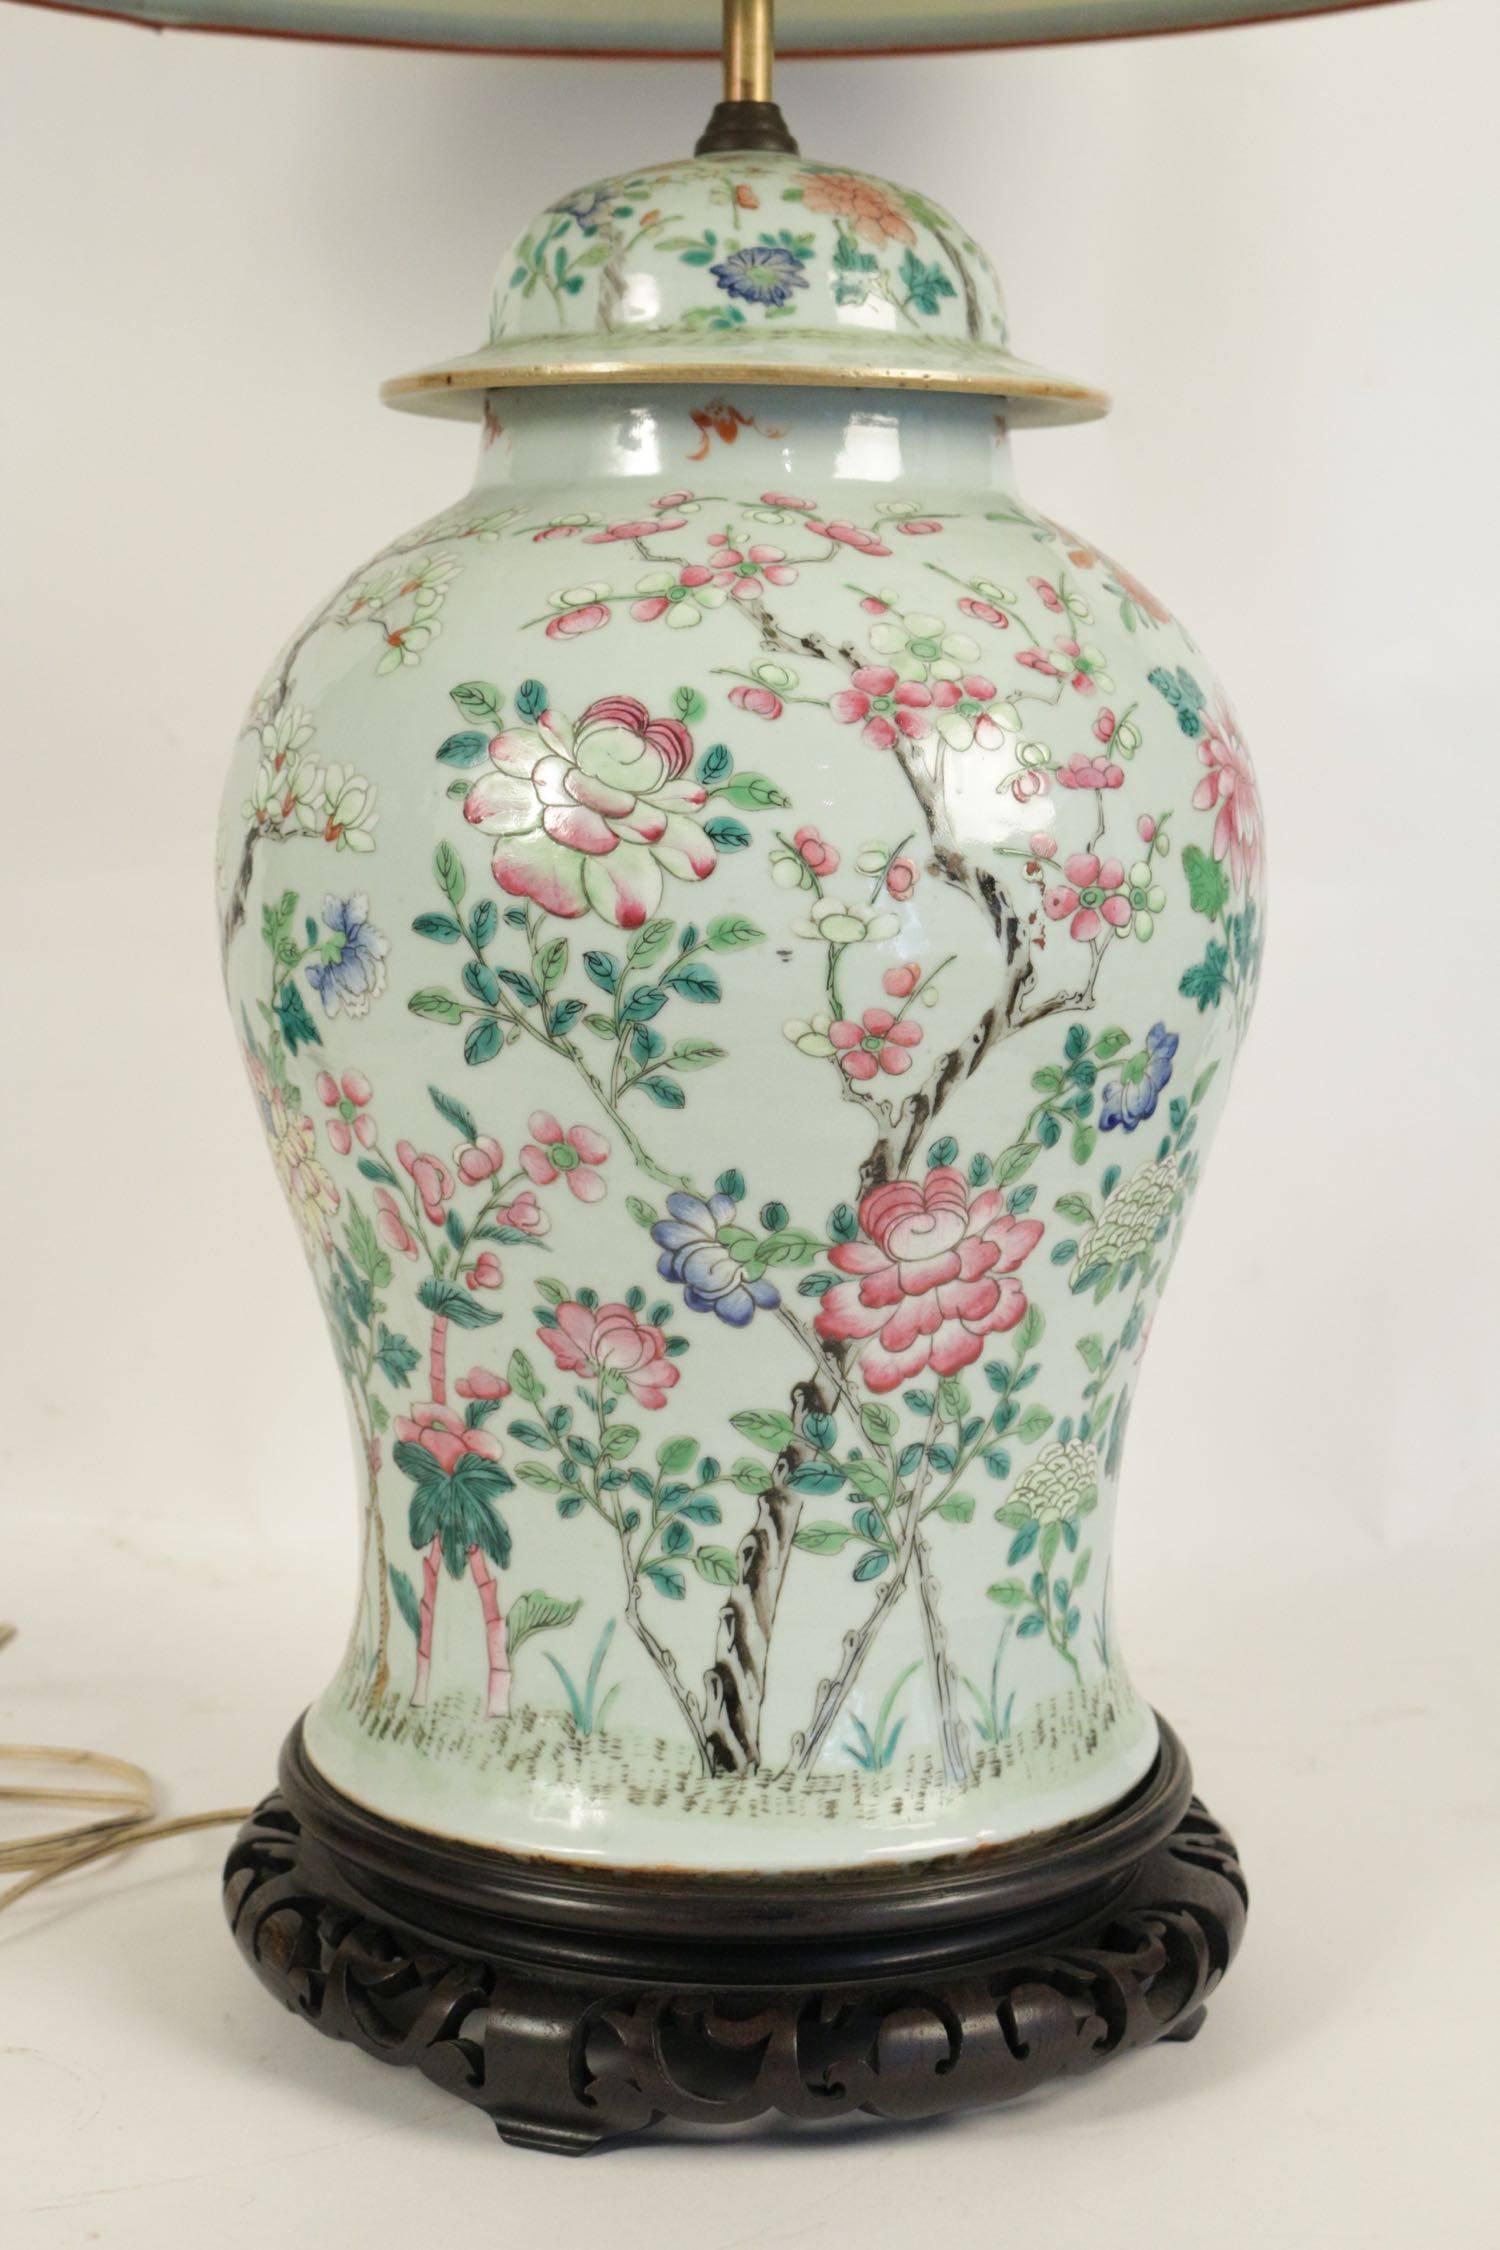 Important Chinese Porcelain lamp circa 1890-1900. Mounted on a base of hand carved wood, China, antique.